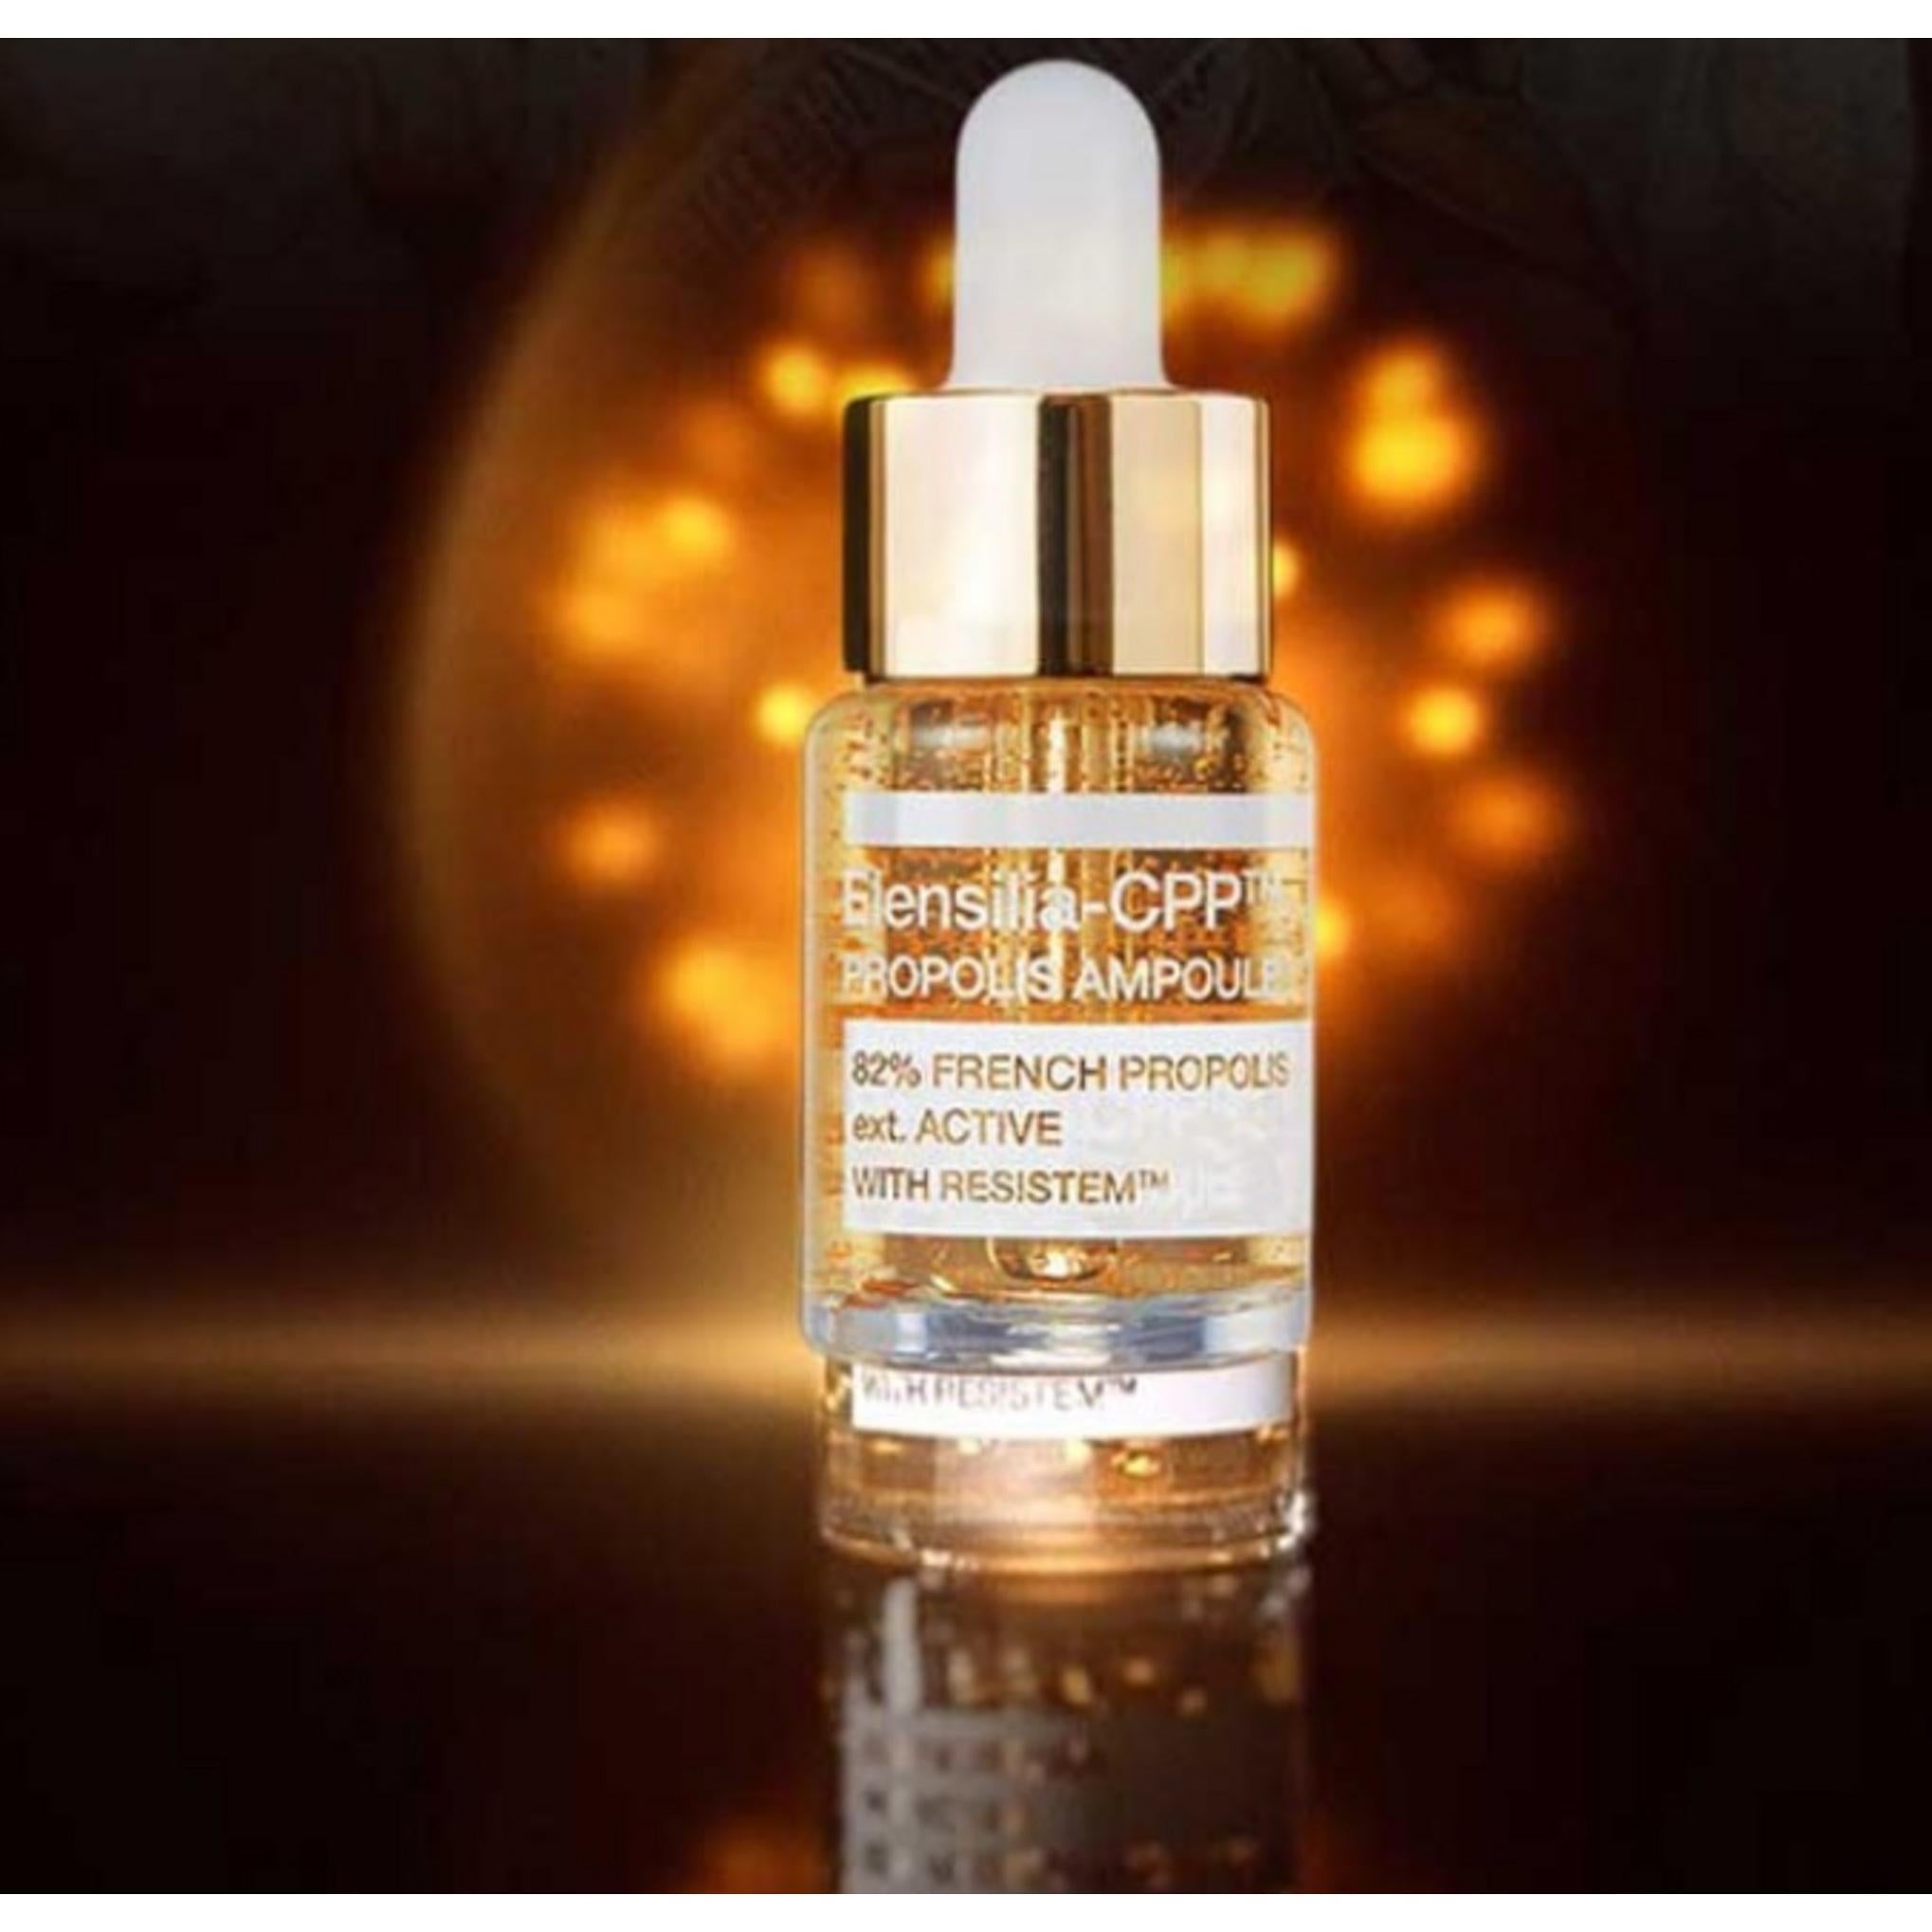 Elensilla CPP French Propolis 82 Resystem Gold Ampoule